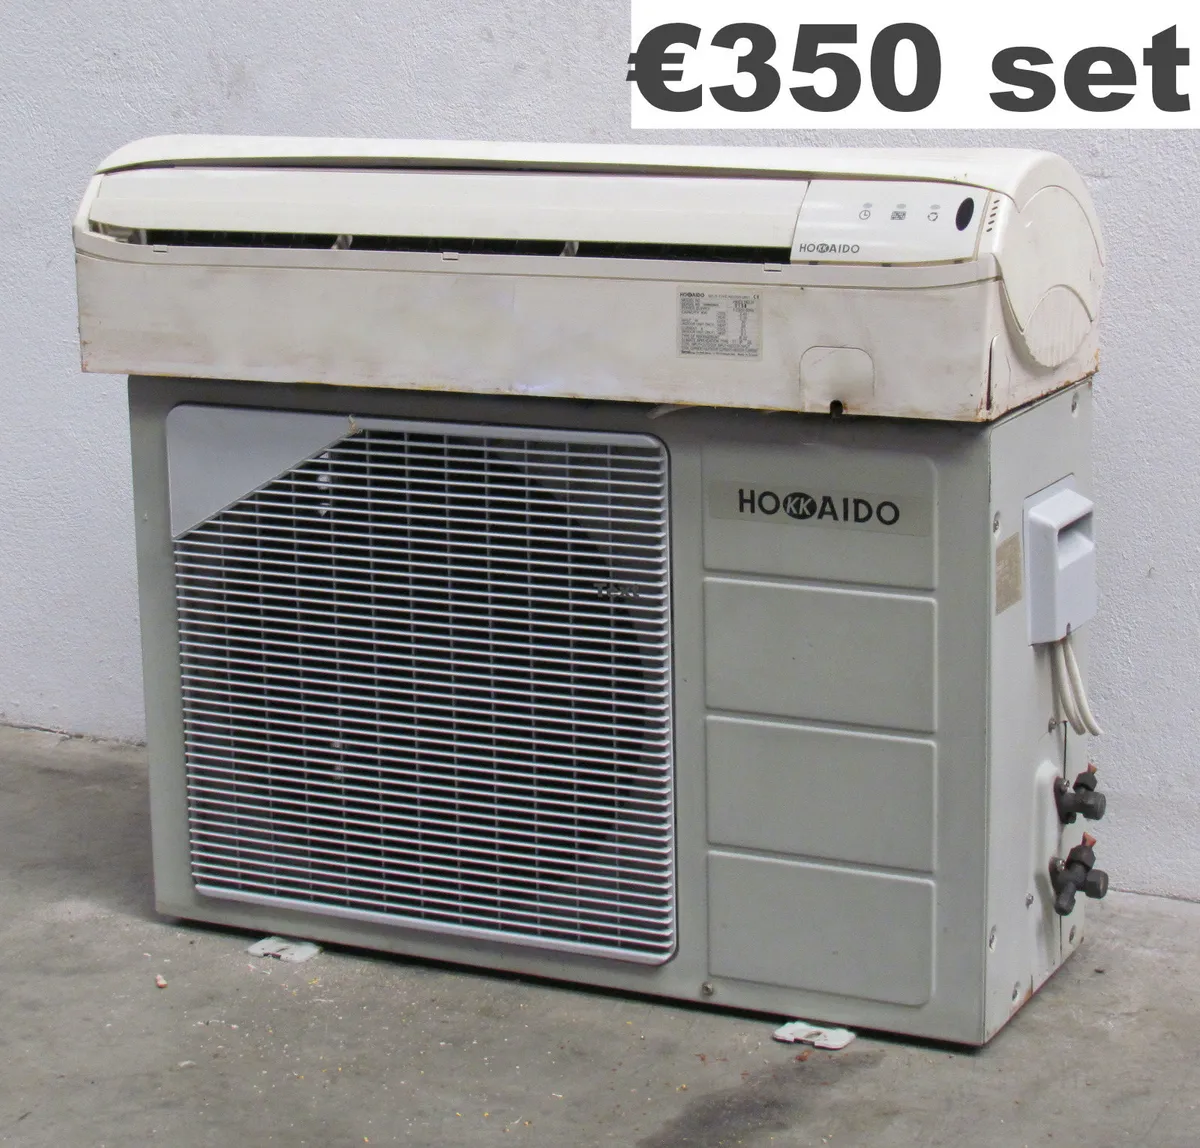 Air conditioner units, spares & accessoriers - Image 2